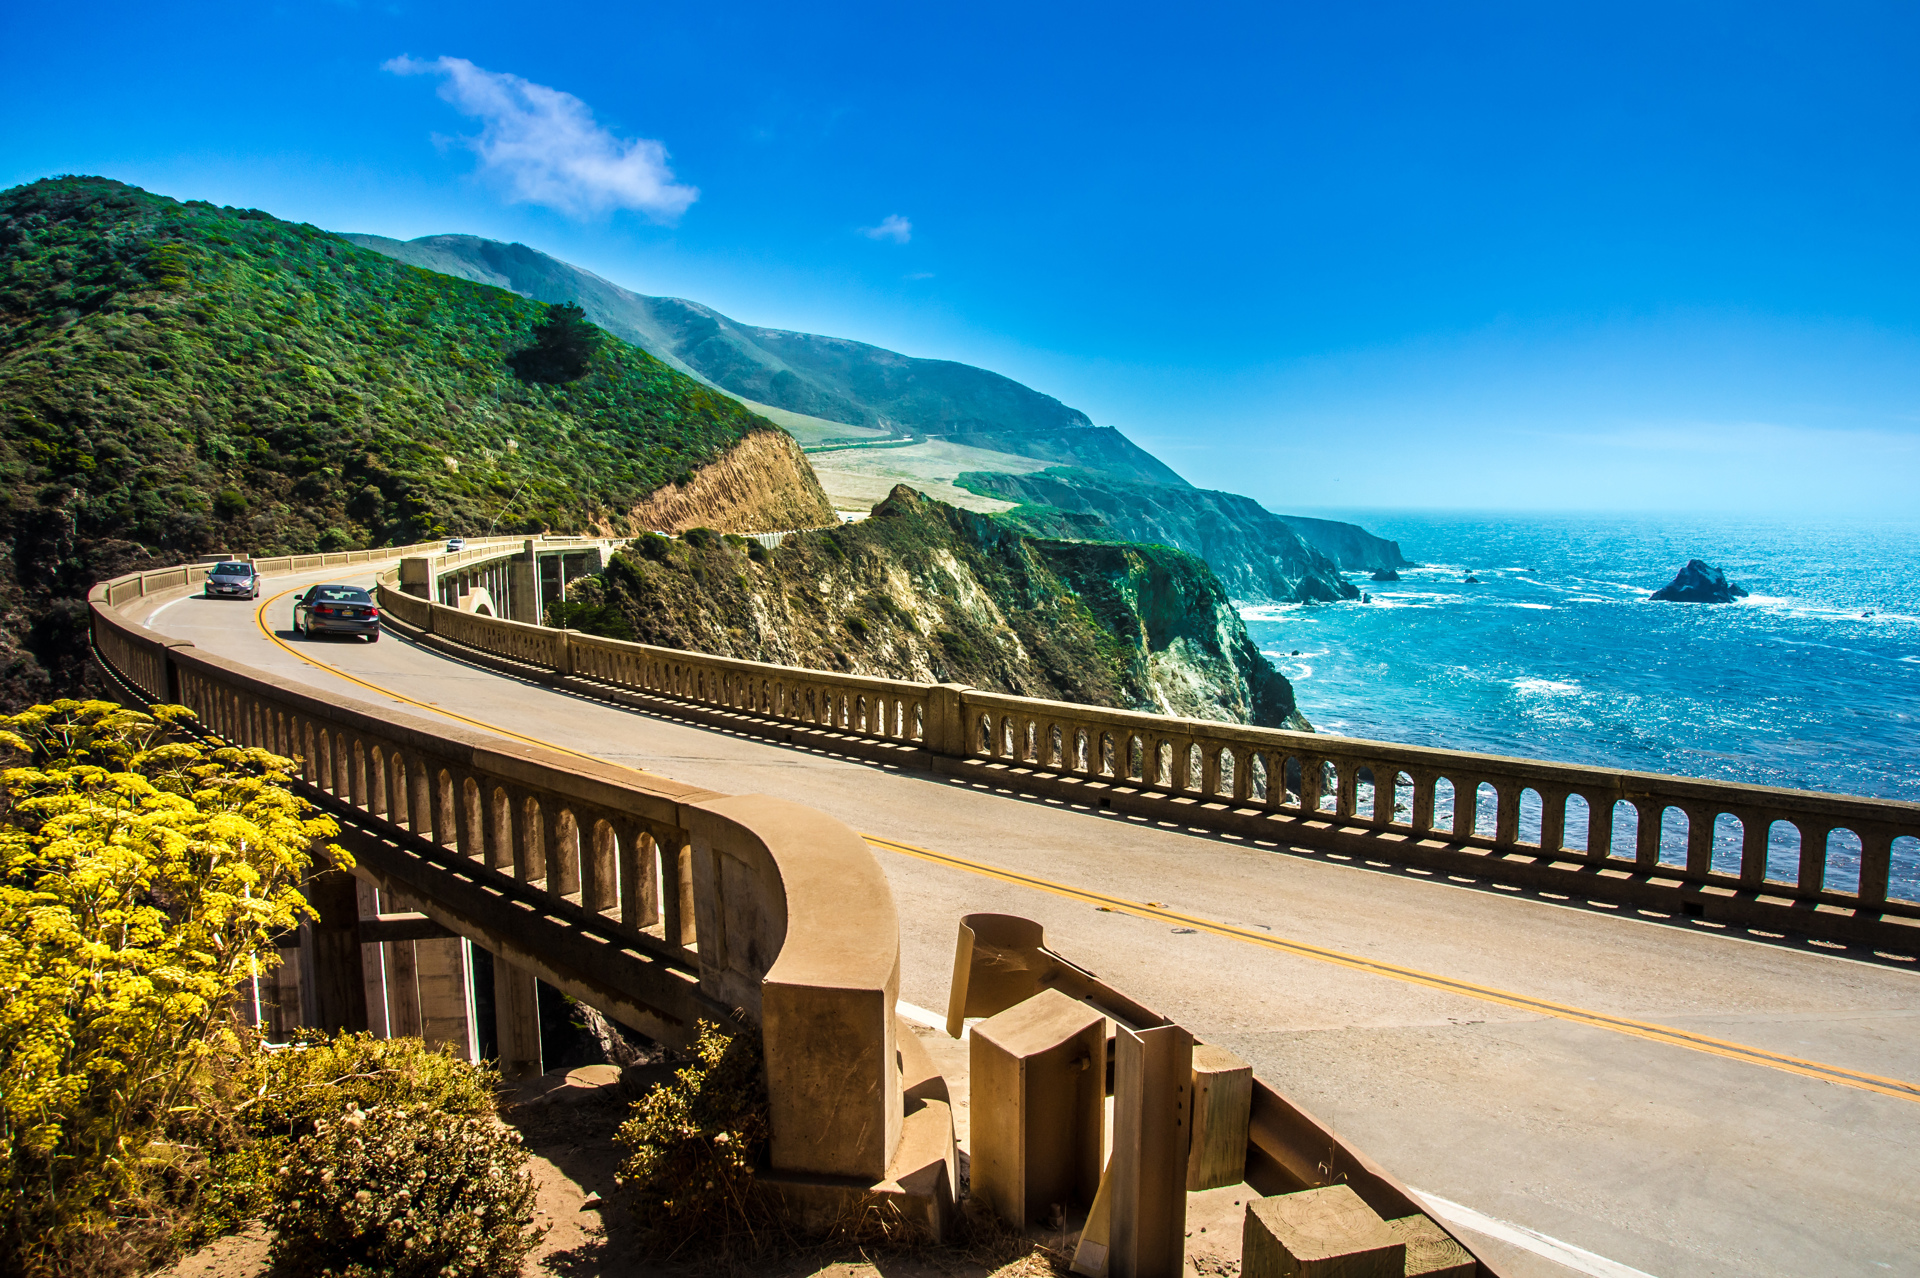 highway 1 road trip from san francisco